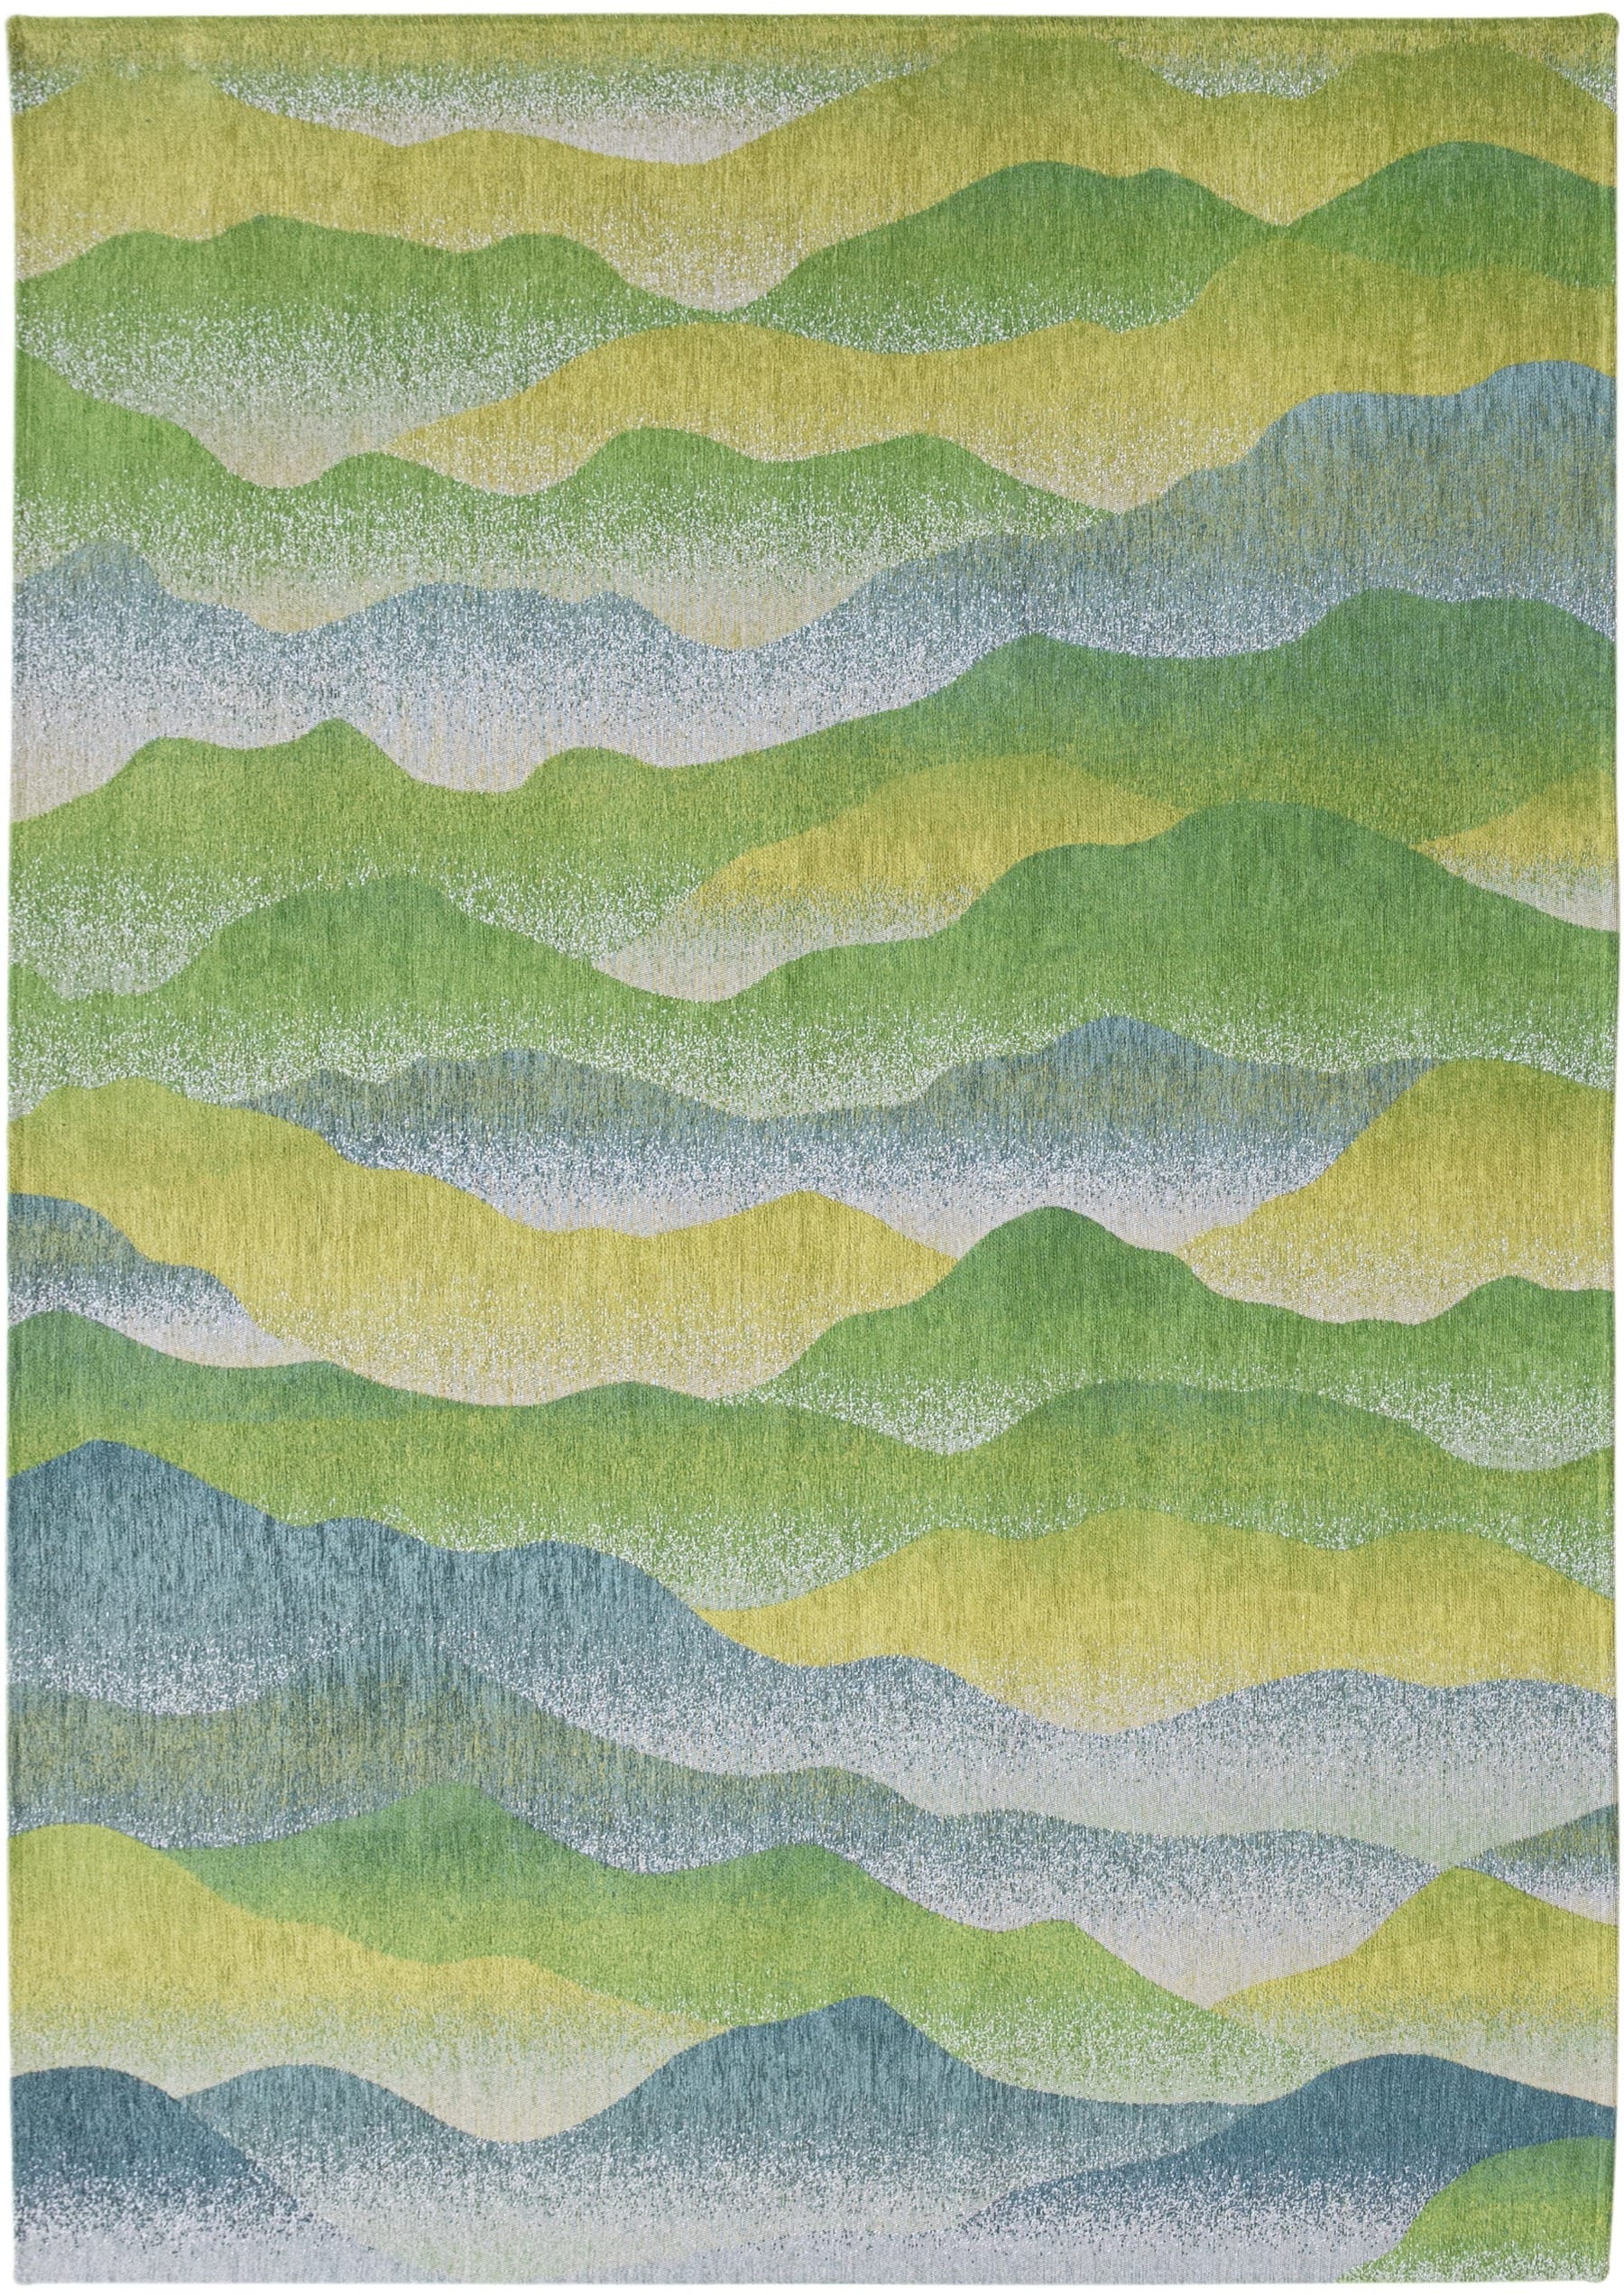 Gallery Collection Himalaya Spring 9379 rug by Louis De Poortere